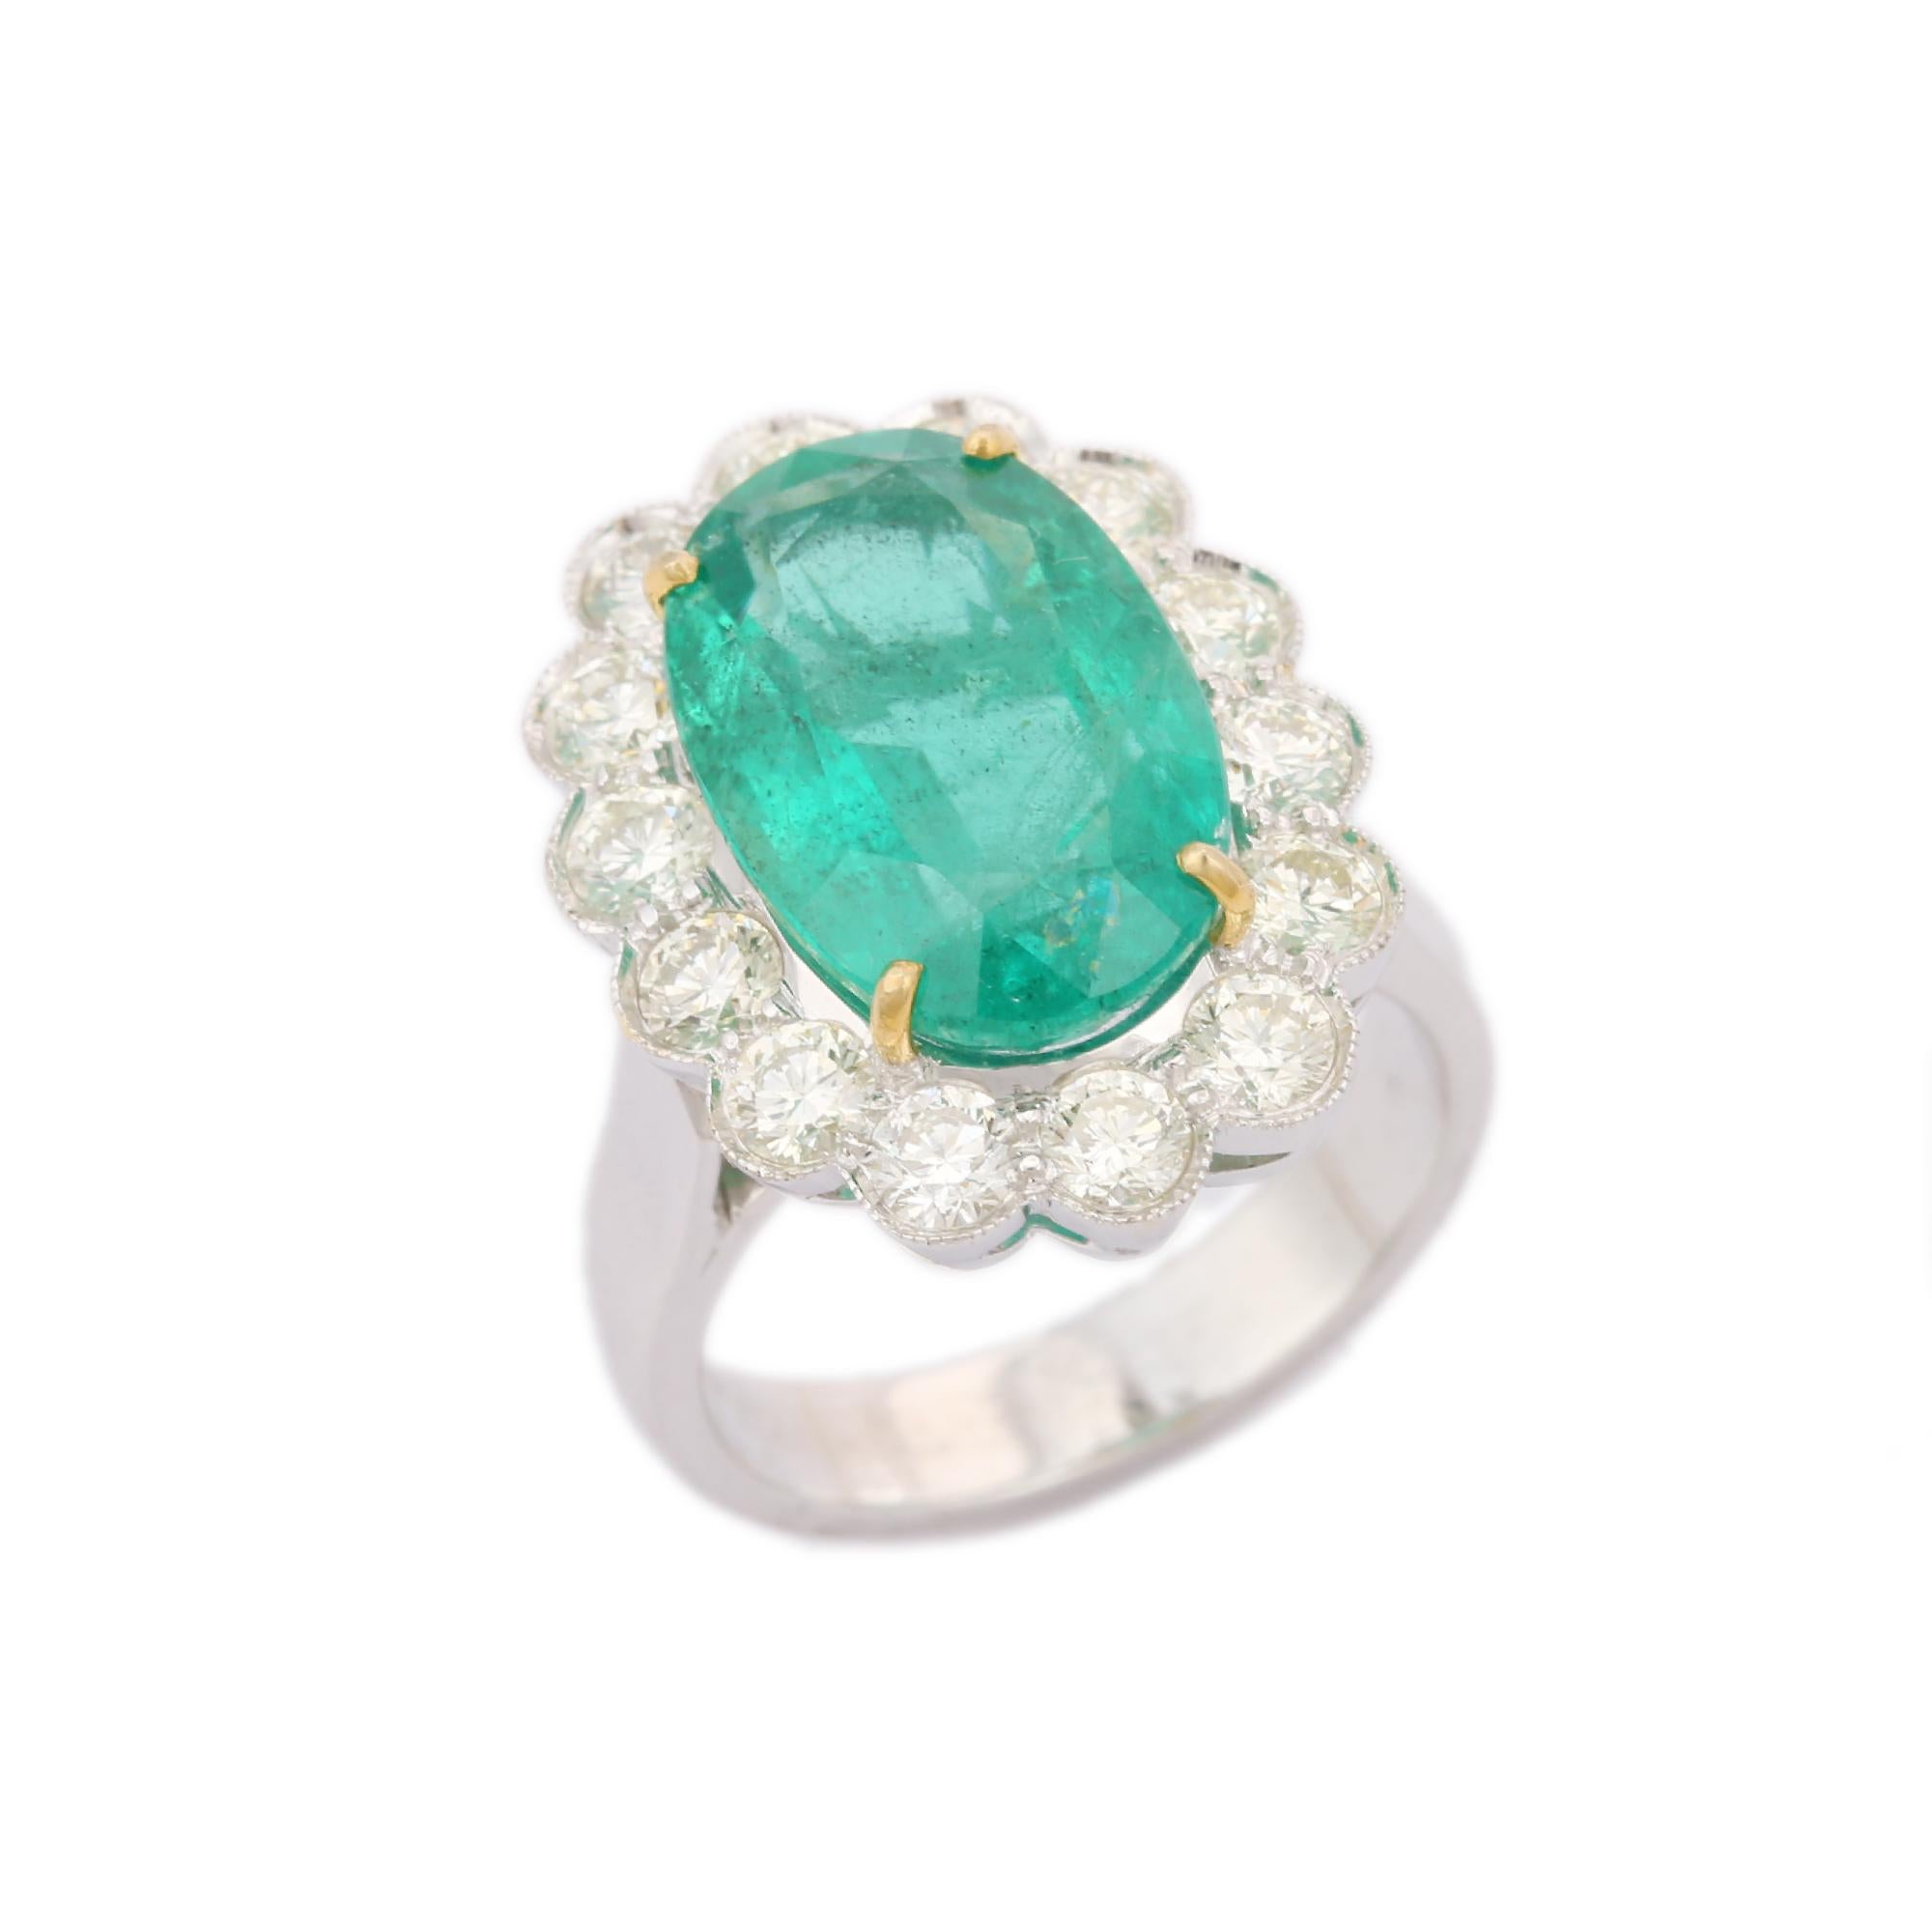 For Sale:  18kt Solid White Gold 8.21 Carat Emerald Gemstone Ring With Diamonds 5